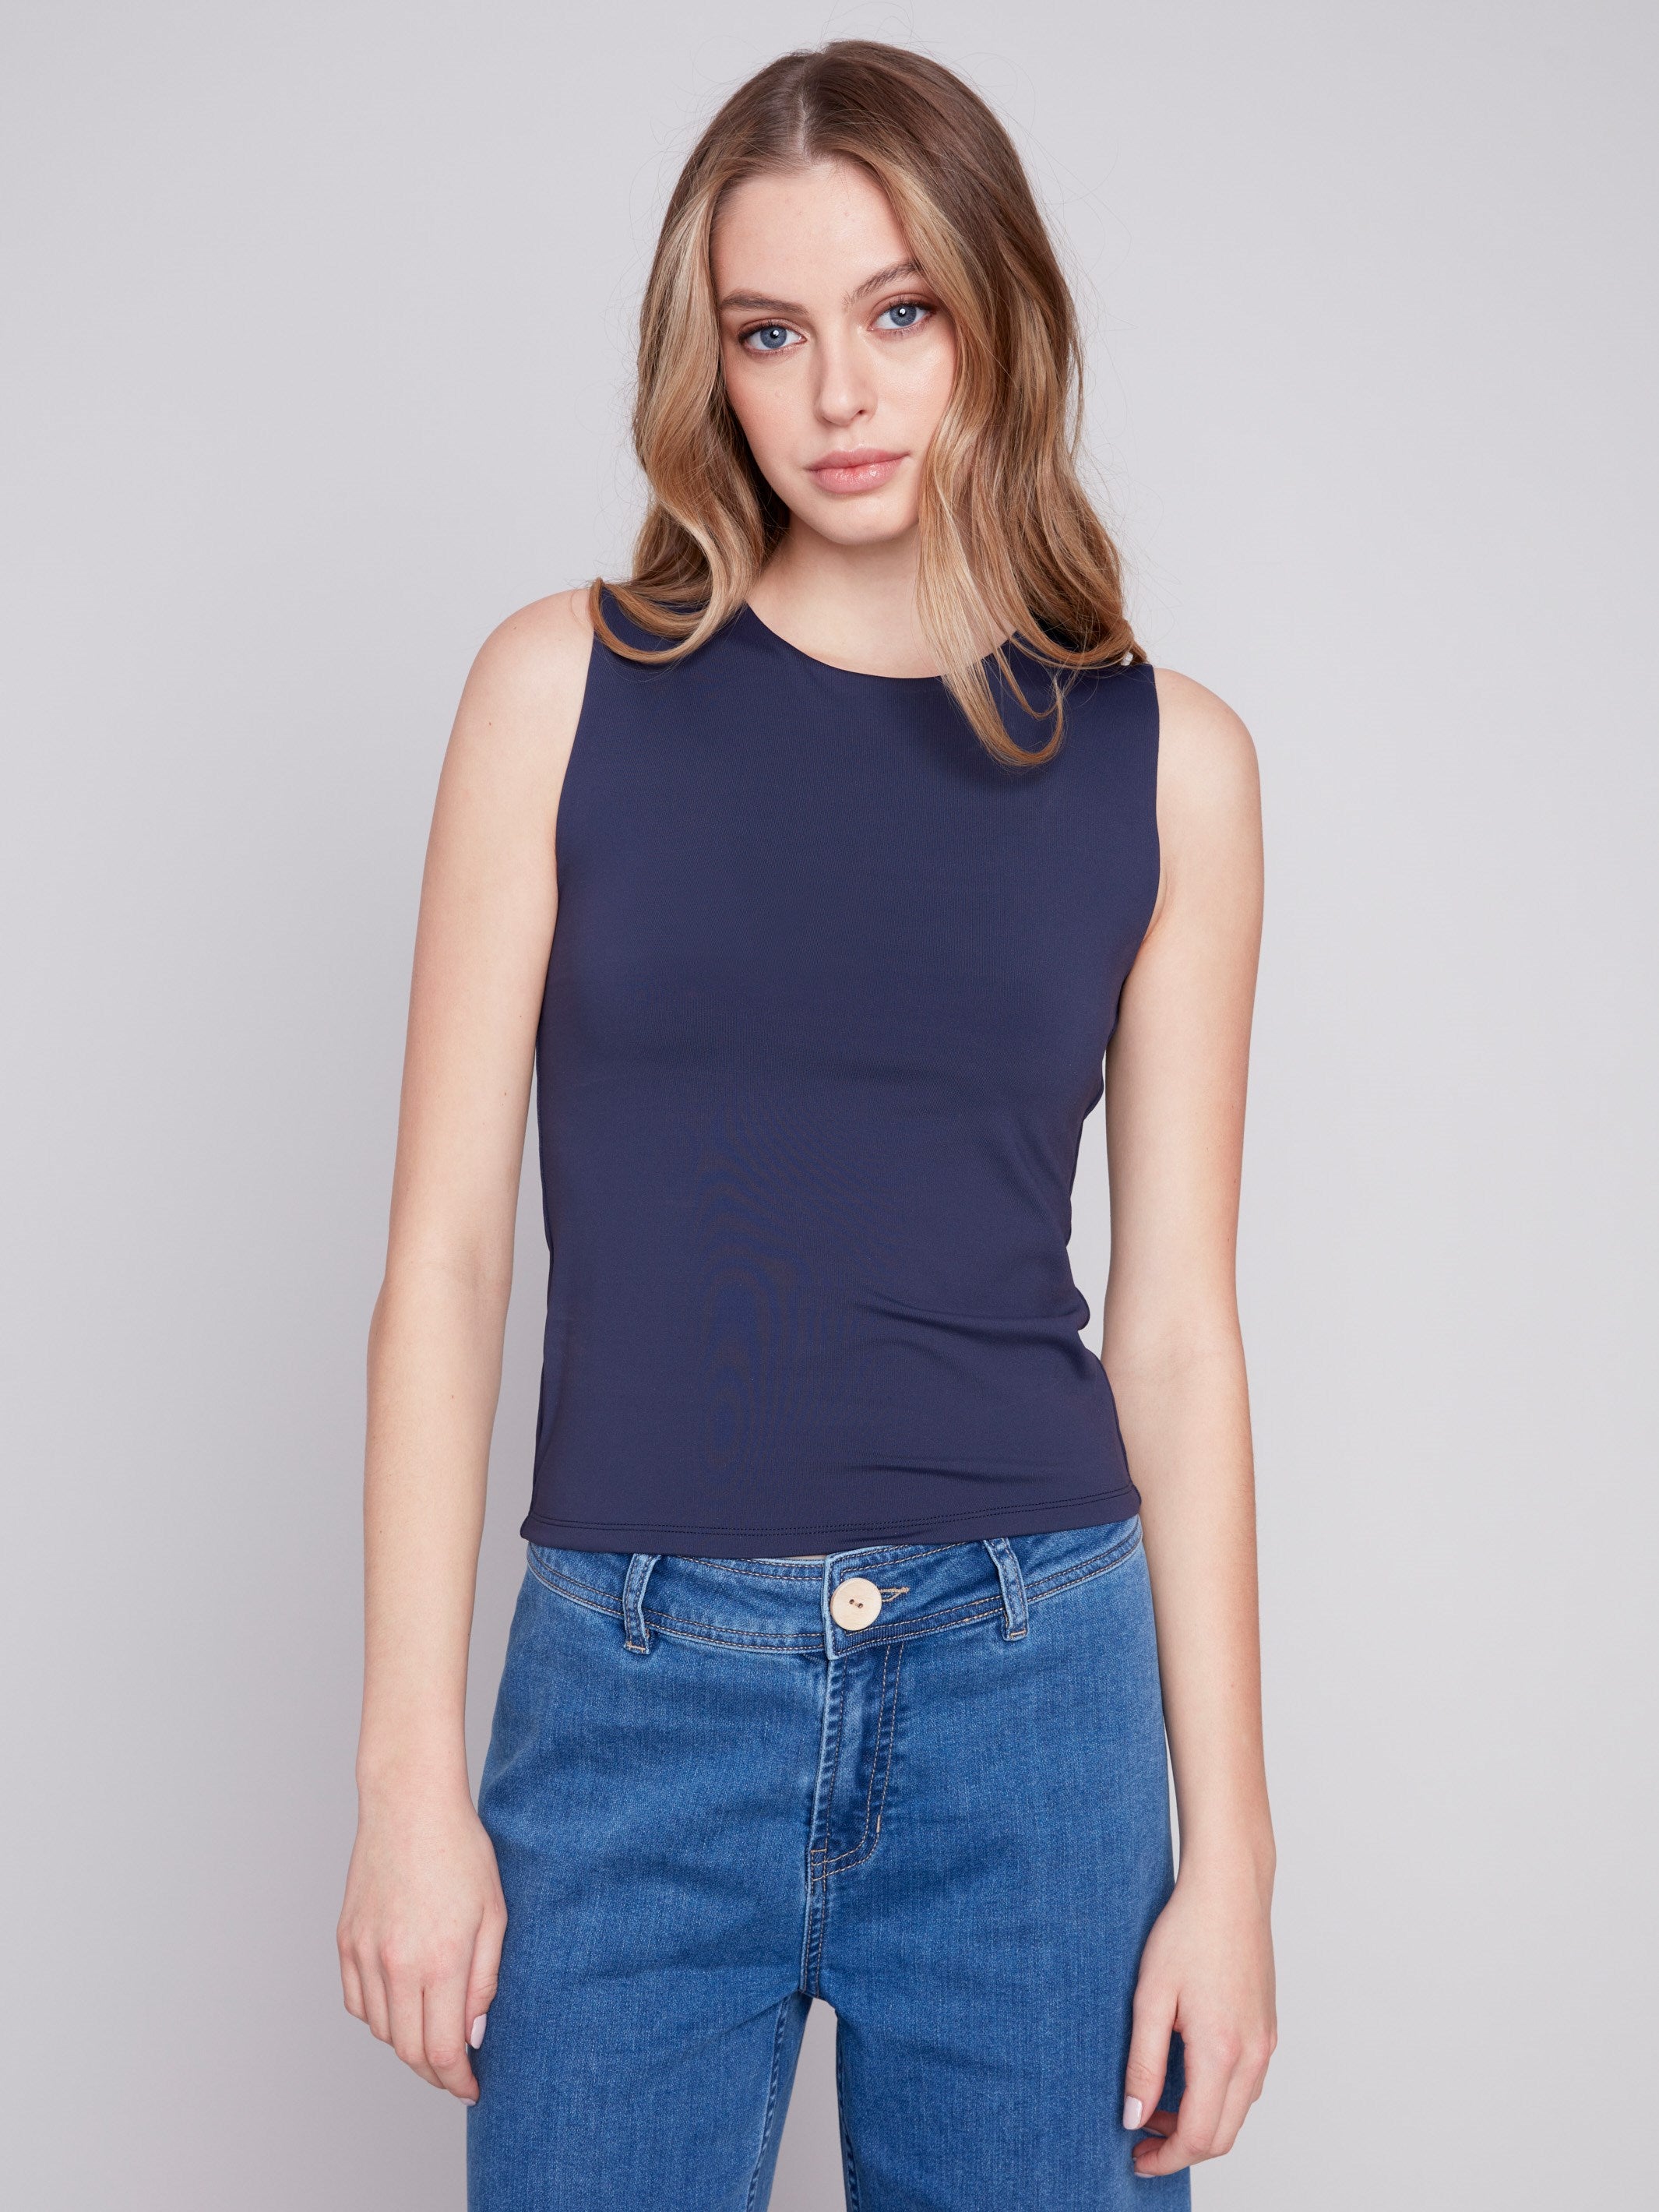 Sleeveless Super Stretch Top - Navy - Charlie B Collection Canada - Image 1